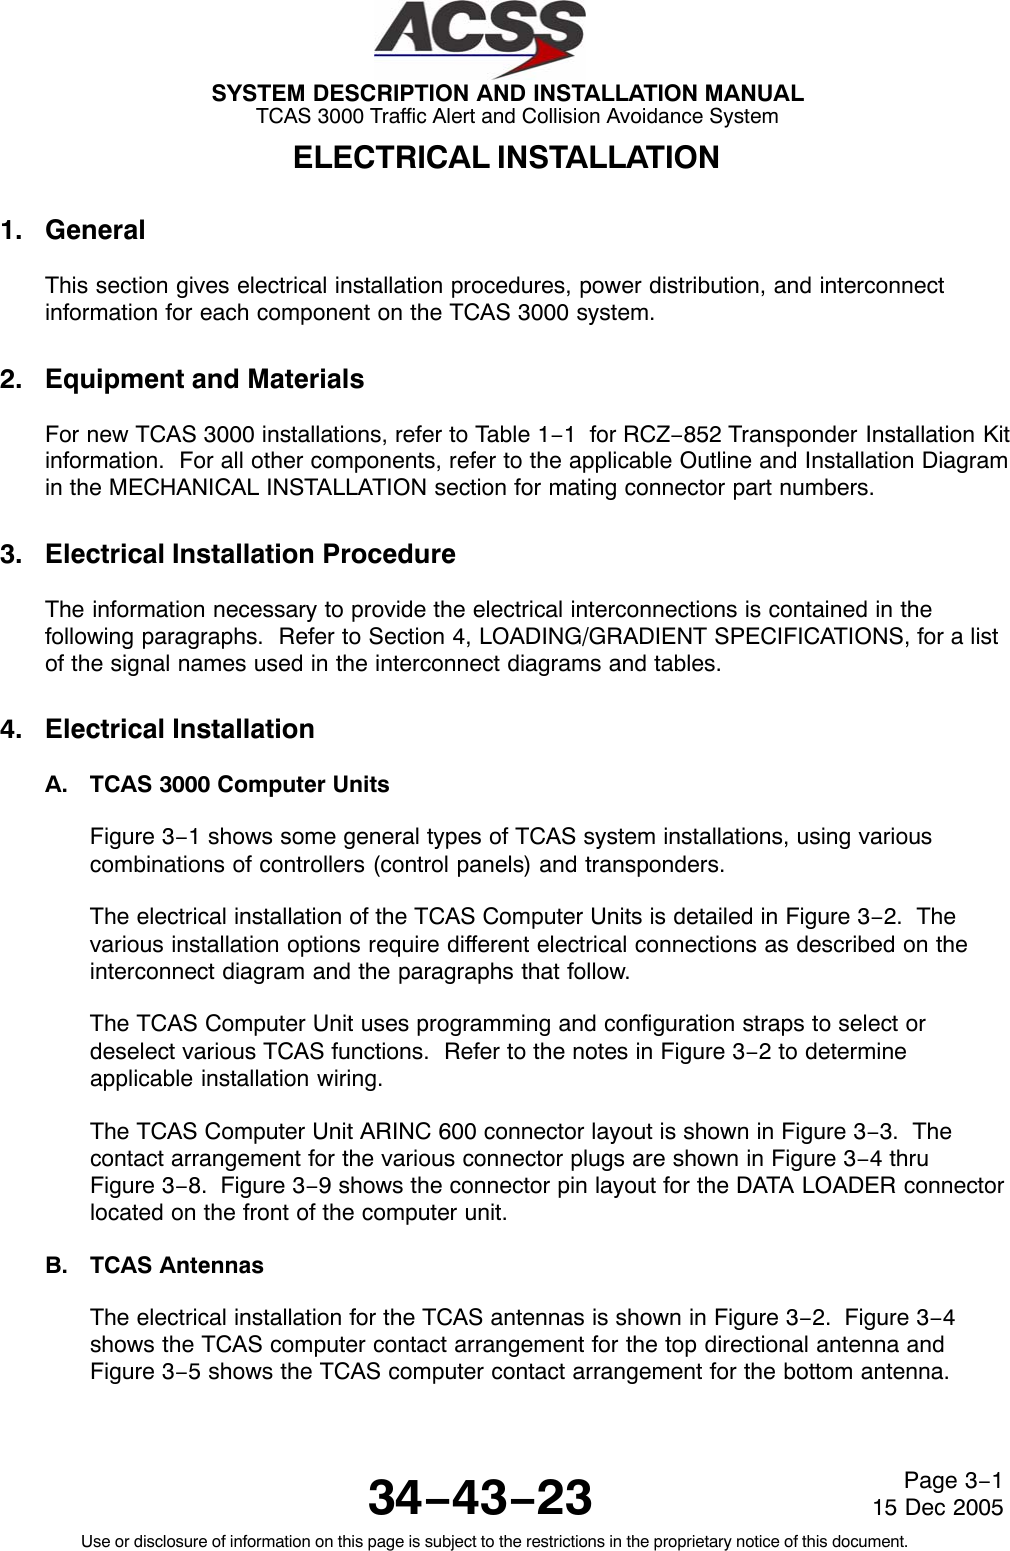 SYSTEM DESCRIPTION AND INSTALLATION MANUAL TCAS 3000 Traffic Alert and Collision Avoidance System34−43−23Use or disclosure of information on this page is subject to the restrictions in the proprietary notice of this document.Page 3−115 Dec 2005ELECTRICAL INSTALLATION1. GeneralThis section gives electrical installation procedures, power distribution, and interconnectinformation for each component on the TCAS 3000 system.2. Equipment and MaterialsFor new TCAS 3000 installations, refer to Table 1−1  for RCZ−852 Transponder Installation Kitinformation.  For all other components, refer to the applicable Outline and Installation Diagramin the MECHANICAL INSTALLATION section for mating connector part numbers.3. Electrical Installation ProcedureThe information necessary to provide the electrical interconnections is contained in thefollowing paragraphs.  Refer to Section 4, LOADING/GRADIENT SPECIFICATIONS, for a listof the signal names used in the interconnect diagrams and tables.4. Electrical InstallationA. TCAS 3000 Computer UnitsFigure 3−1 shows some general types of TCAS system installations, using variouscombinations of controllers (control panels) and transponders.The electrical installation of the TCAS Computer Units is detailed in Figure 3−2.  Thevarious installation options require different electrical connections as described on theinterconnect diagram and the paragraphs that follow.The TCAS Computer Unit uses programming and configuration straps to select ordeselect various TCAS functions.  Refer to the notes in Figure 3−2 to determineapplicable installation wiring.The TCAS Computer Unit ARINC 600 connector layout is shown in Figure 3−3.  Thecontact arrangement for the various connector plugs are shown in Figure 3−4 thruFigure 3−8.  Figure 3−9 shows the connector pin layout for the DATA LOADER connectorlocated on the front of the computer unit.B. TCAS AntennasThe electrical installation for the TCAS antennas is shown in Figure 3−2.  Figure 3−4shows the TCAS computer contact arrangement for the top directional antenna andFigure 3−5 shows the TCAS computer contact arrangement for the bottom antenna.